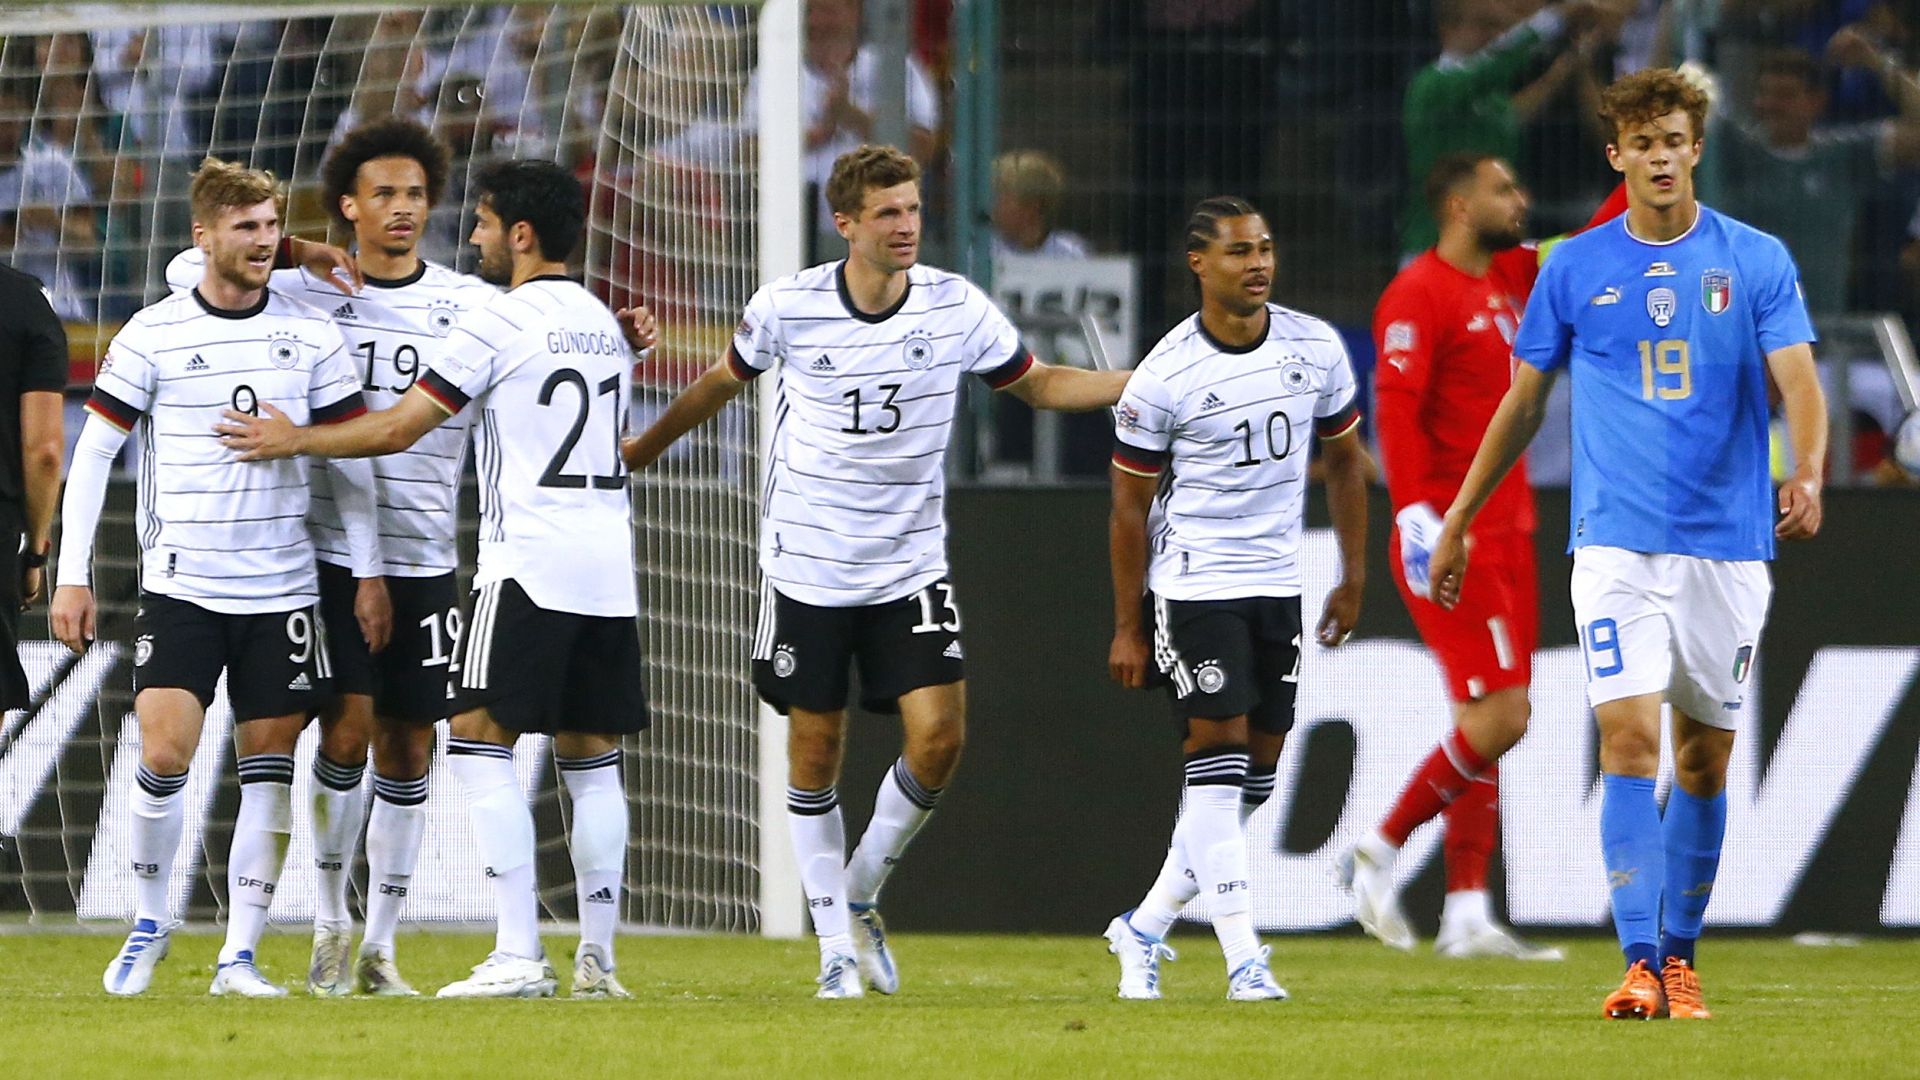 Germany defeated Italy 5-2 in the final game of Group A3 of Nations League 2022